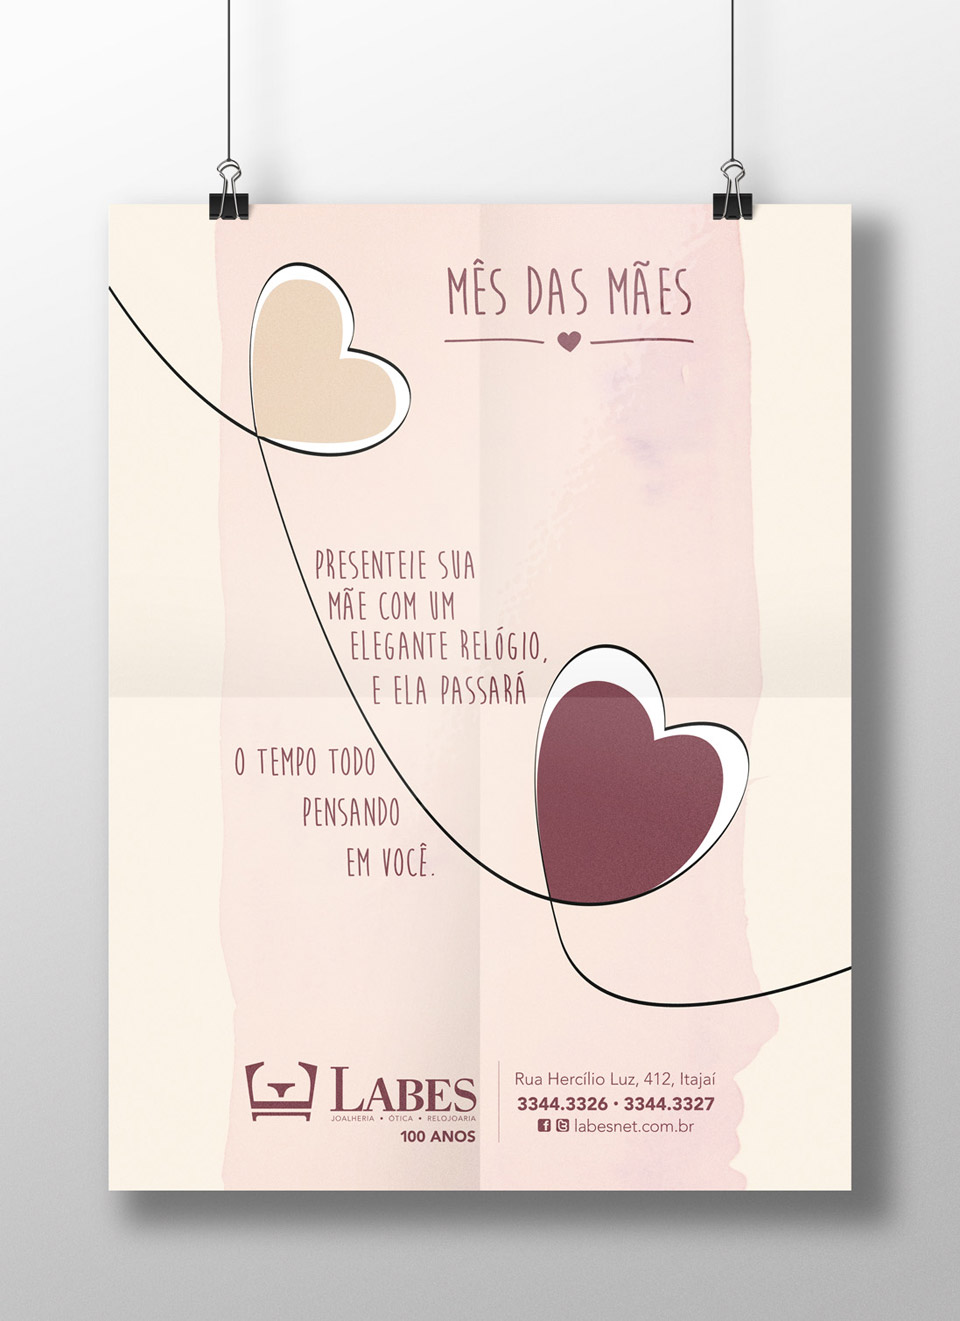 labes_maes_2014_2